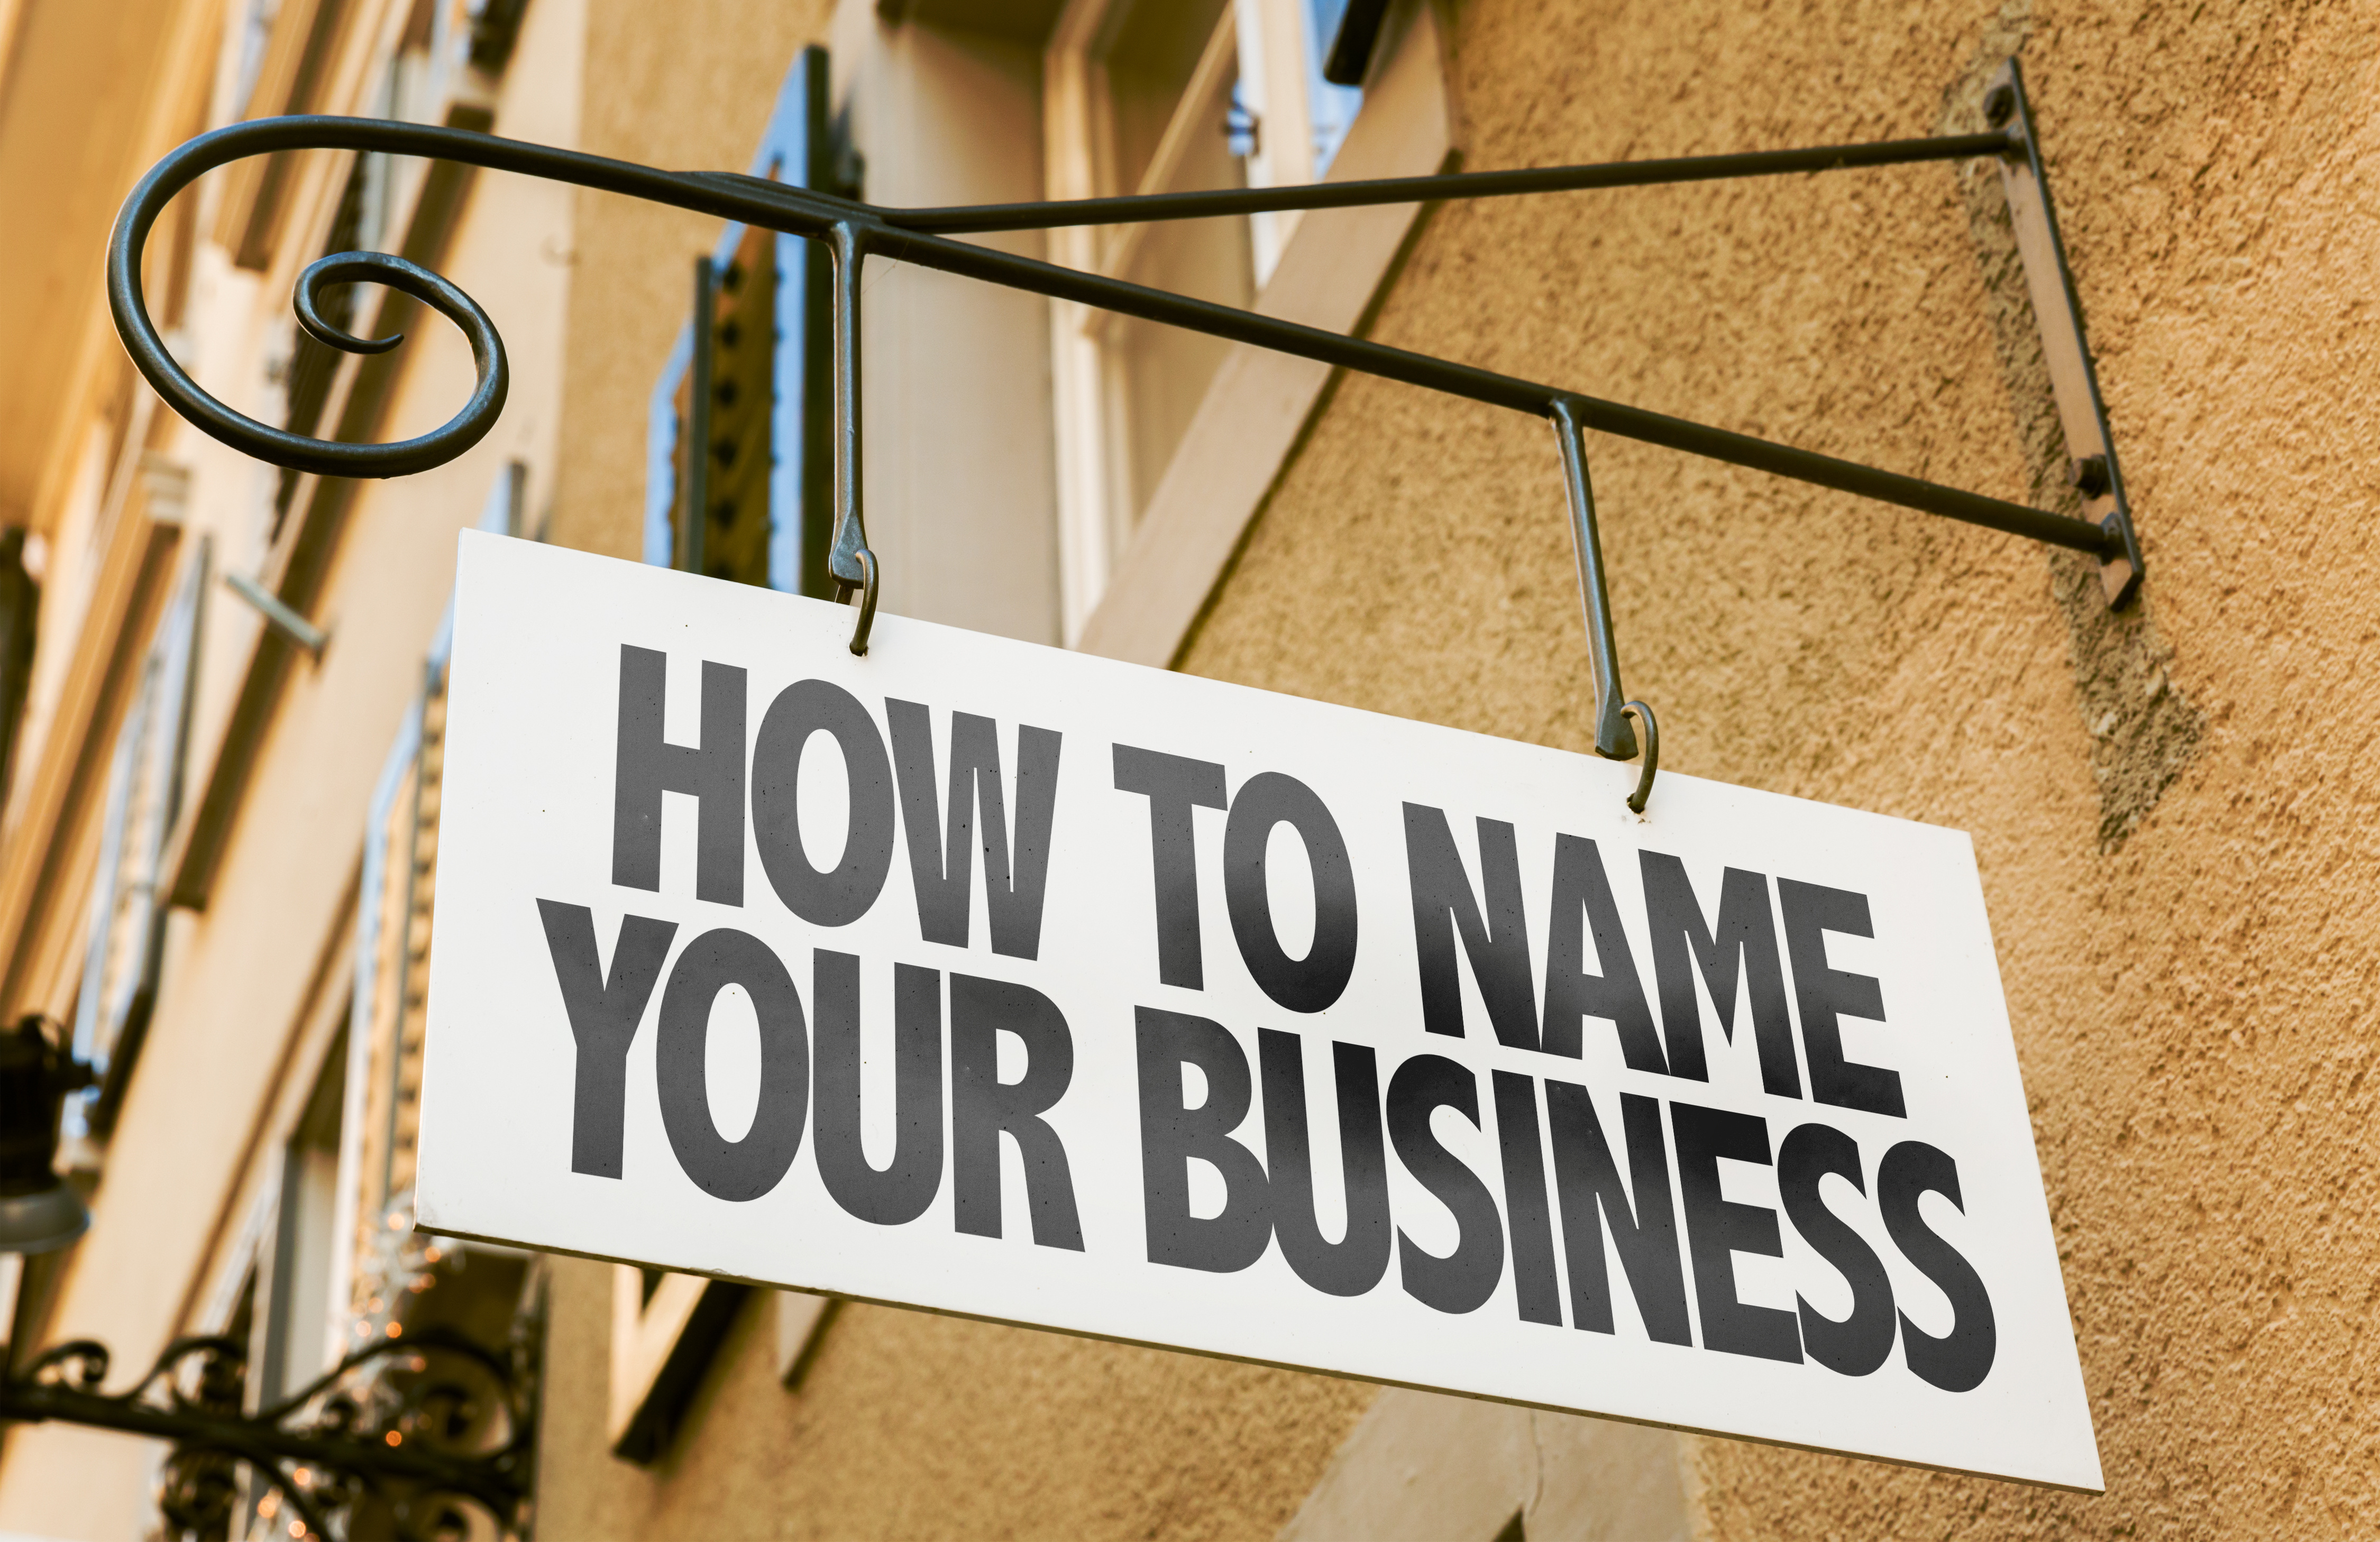 HOW TO CHOOSE THE RIGHT BUSINESS NAME